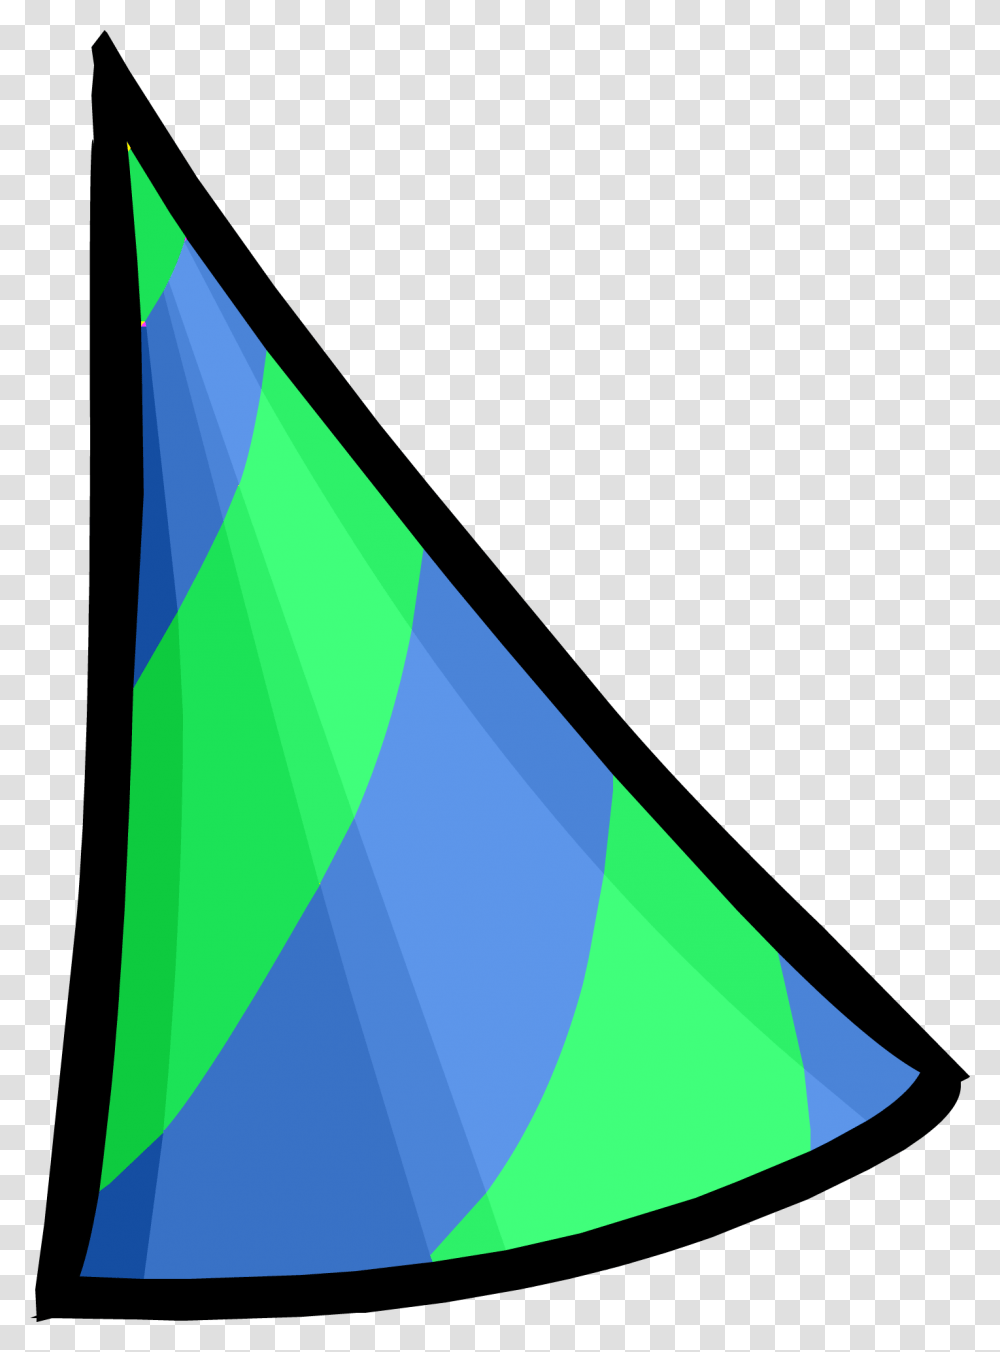 Vintage Penguin Wiki Green And Blue Party Hat, Triangle, Cone Transparent Png